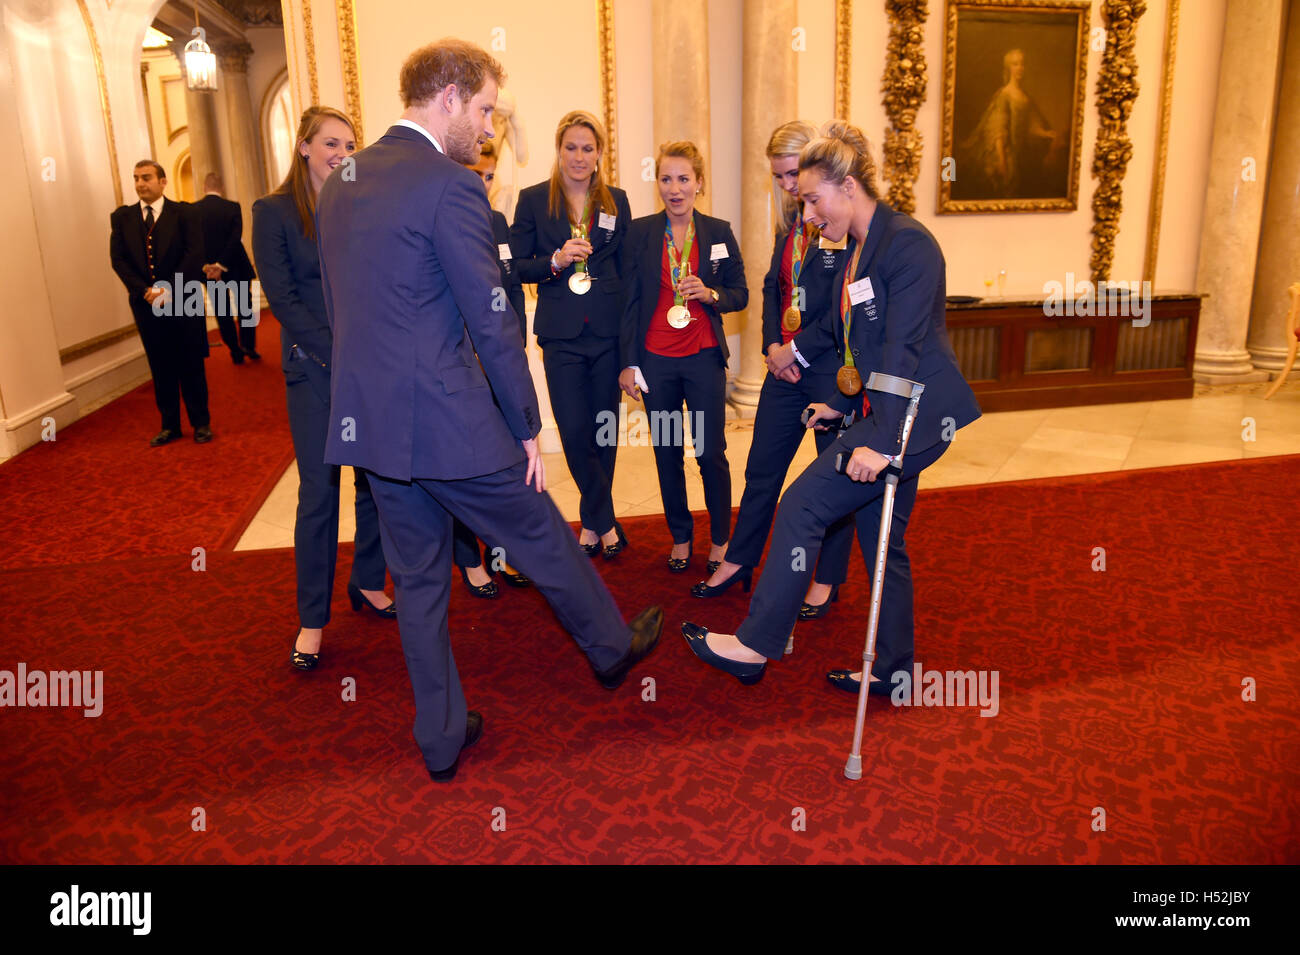 Prince Harry meets the ladies Hockey Team with Susannah Townsend on crutches during a reception for Team GB and ParalympicsGB medallists from the 2016 Olympic and Paralympic Games at Buckingham Palace in London. Stock Photo